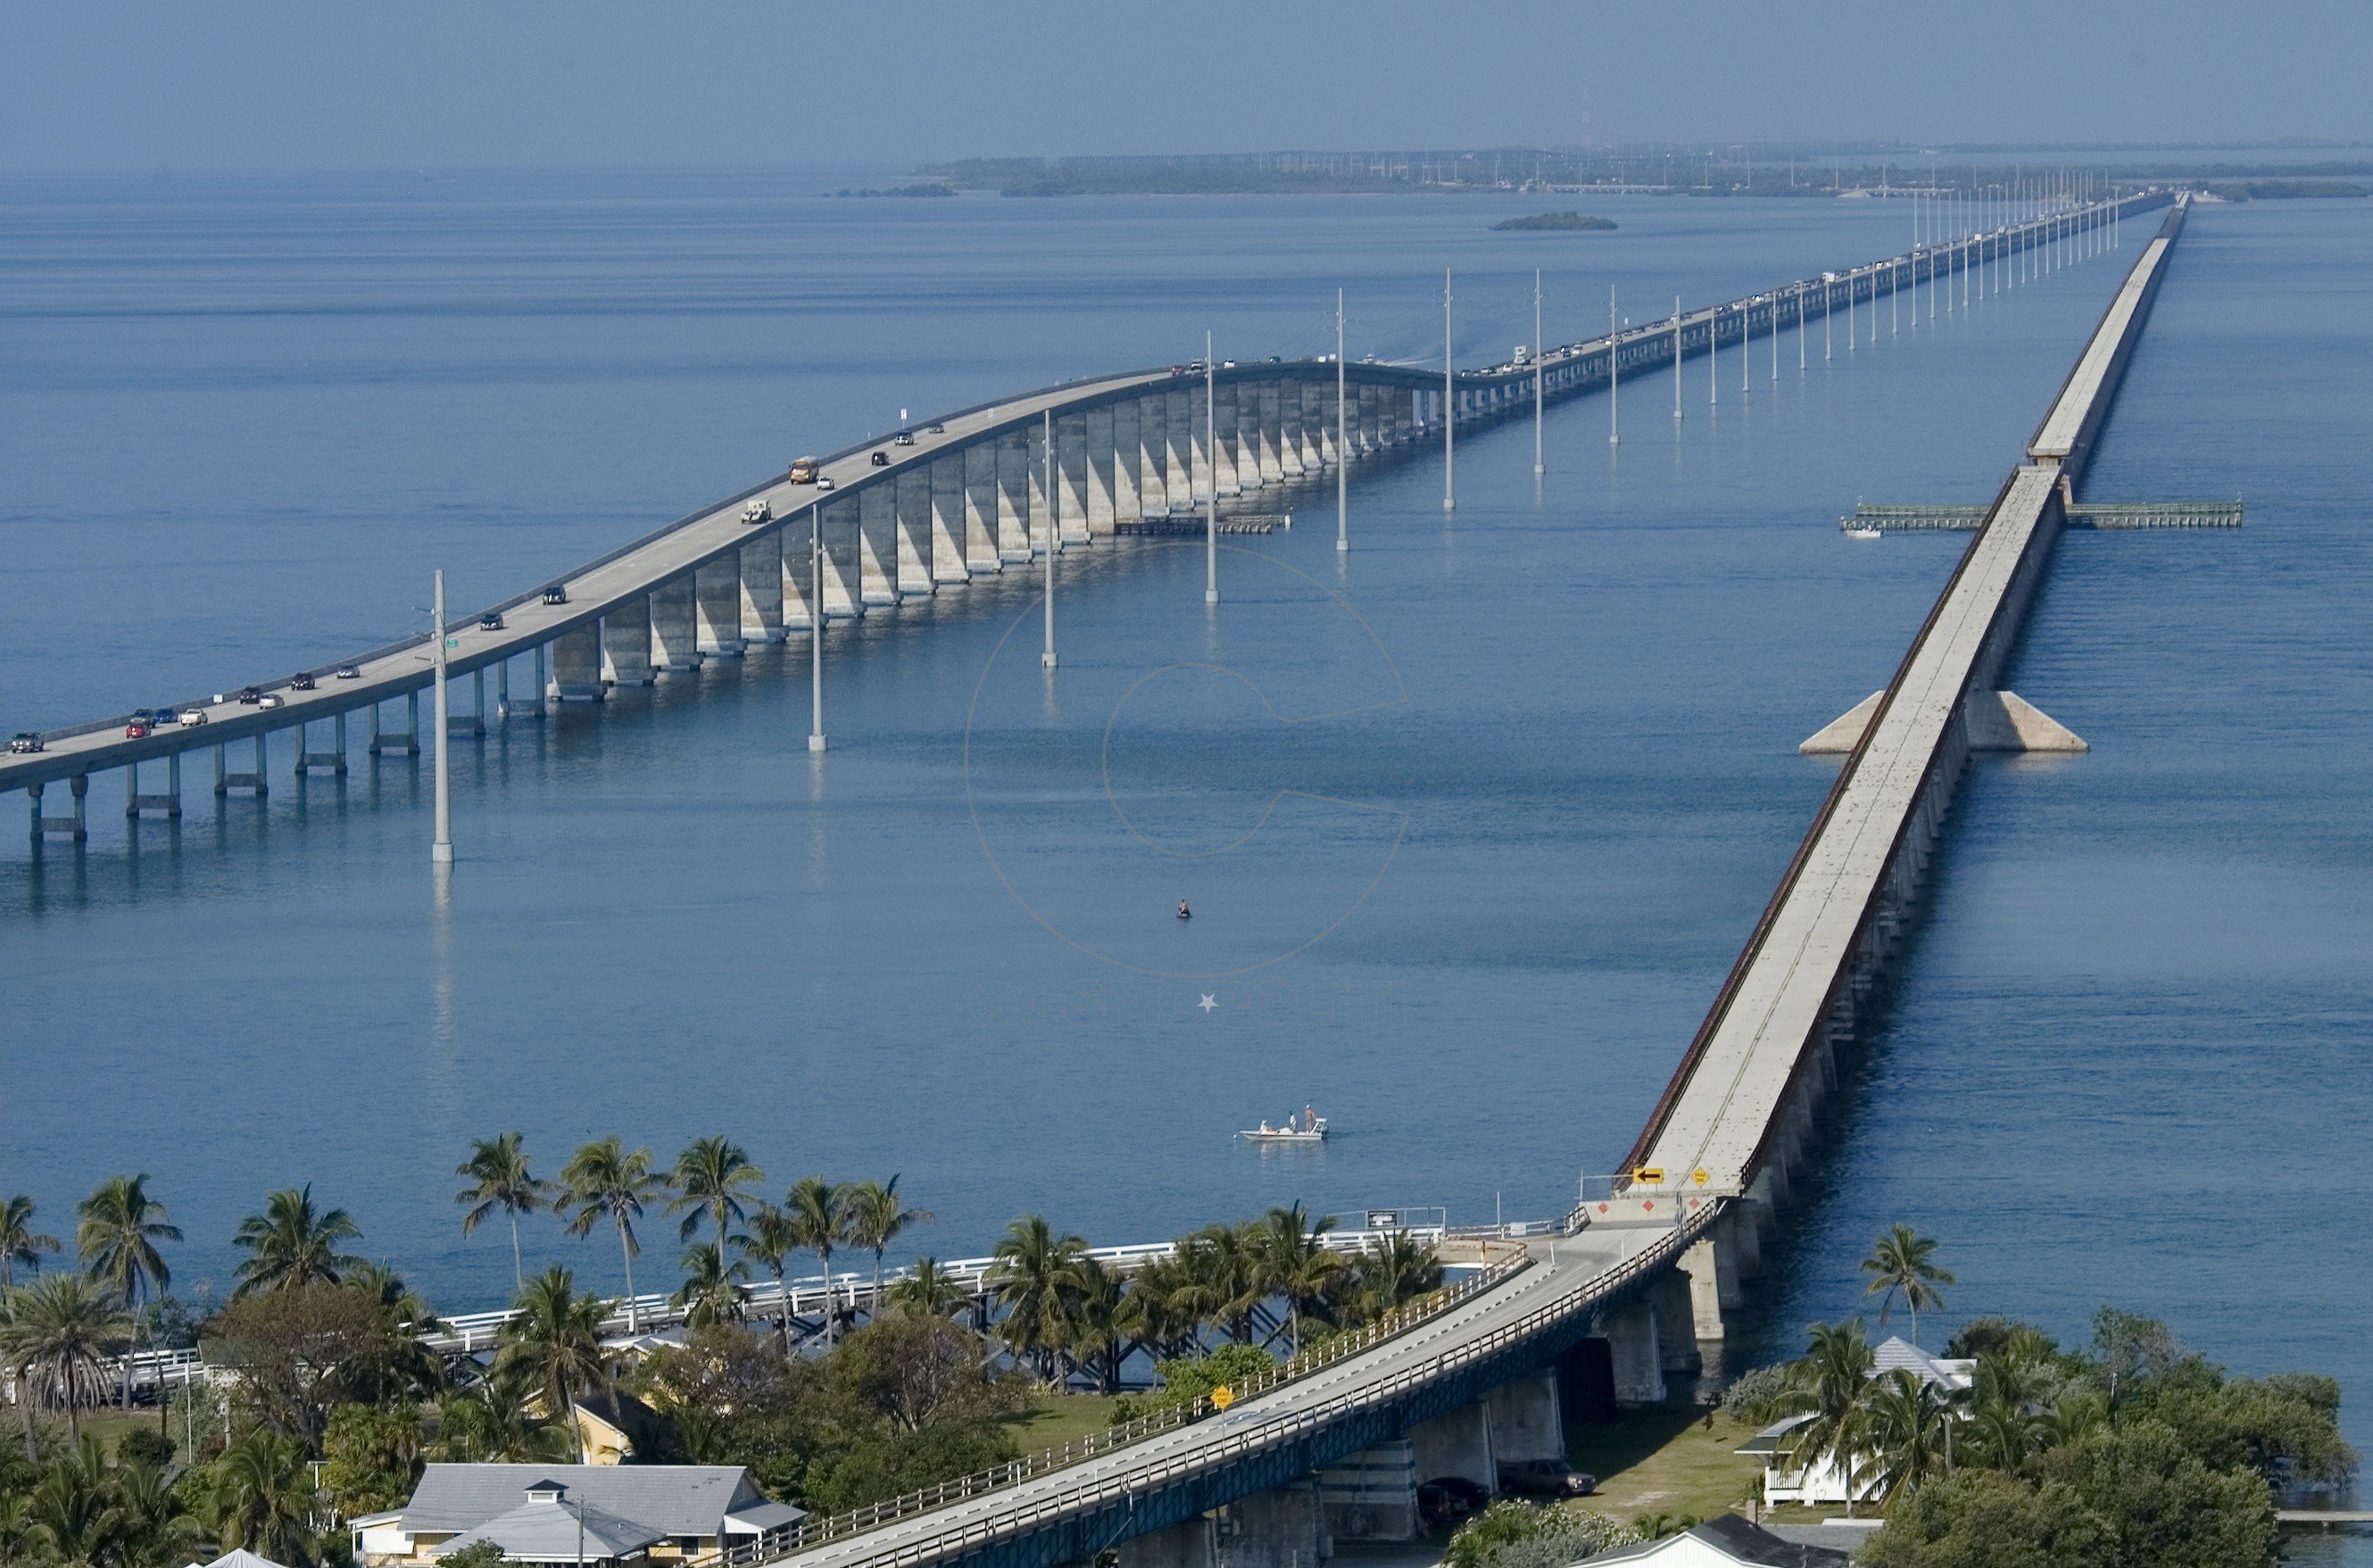 The historic old Seven Mile Bridge in the Florida Keys near Marathon, Fla., is shown at right, cutting through Pigeon Key, a small island that once housed workers who aided the effort to build Henry Flagler's Overseas Railroad. The more modern span, completed in 1982, is at left. (Photo by Andy Newman/Florida Keys News Bureau)